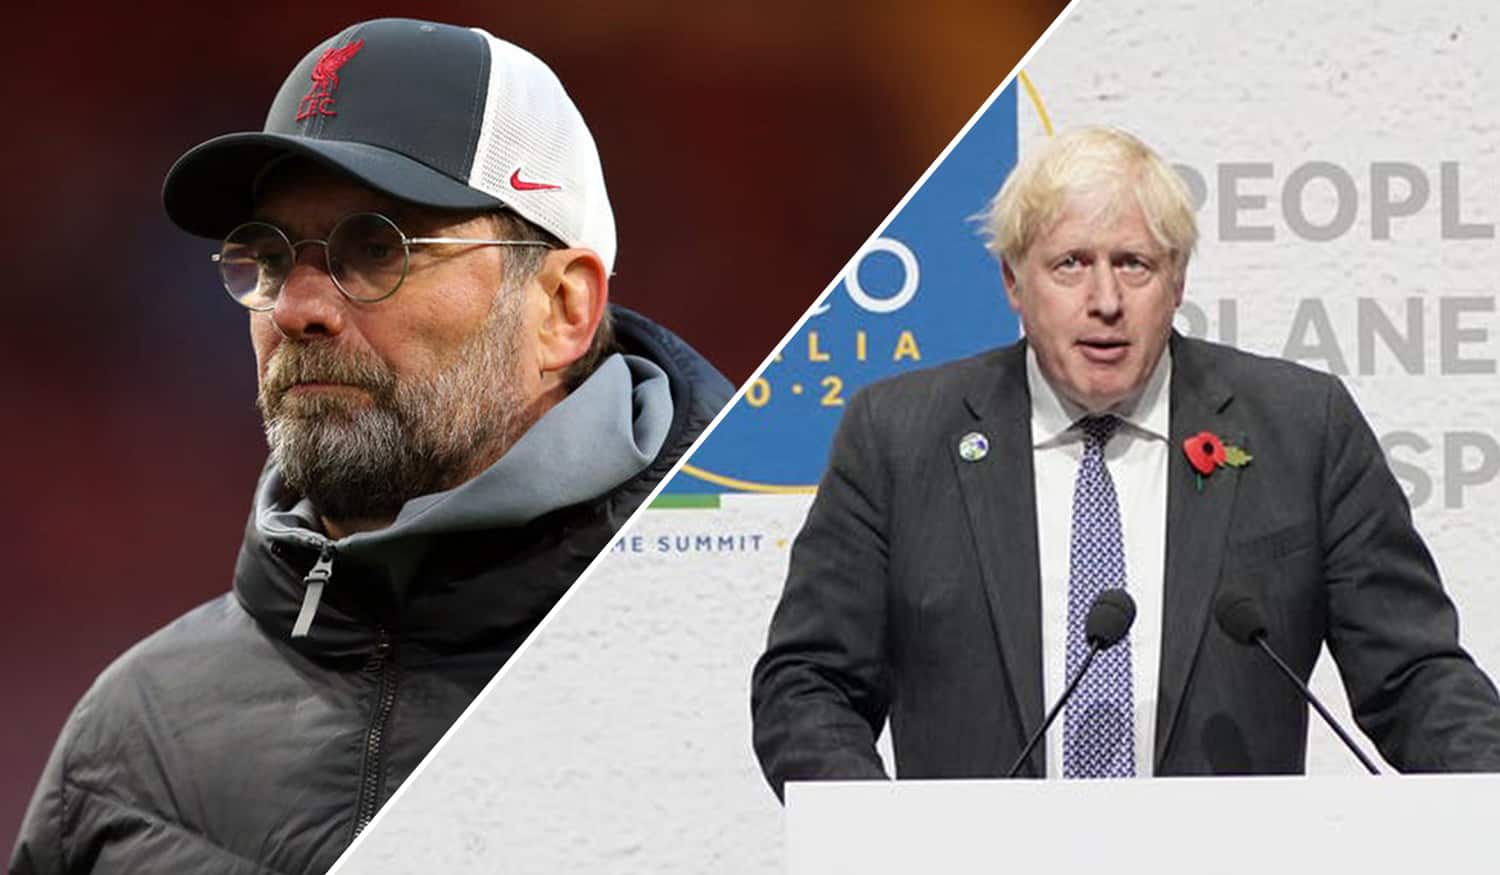 Liverpool boss says Boris Johnson’s election was ‘bad sign for the world’